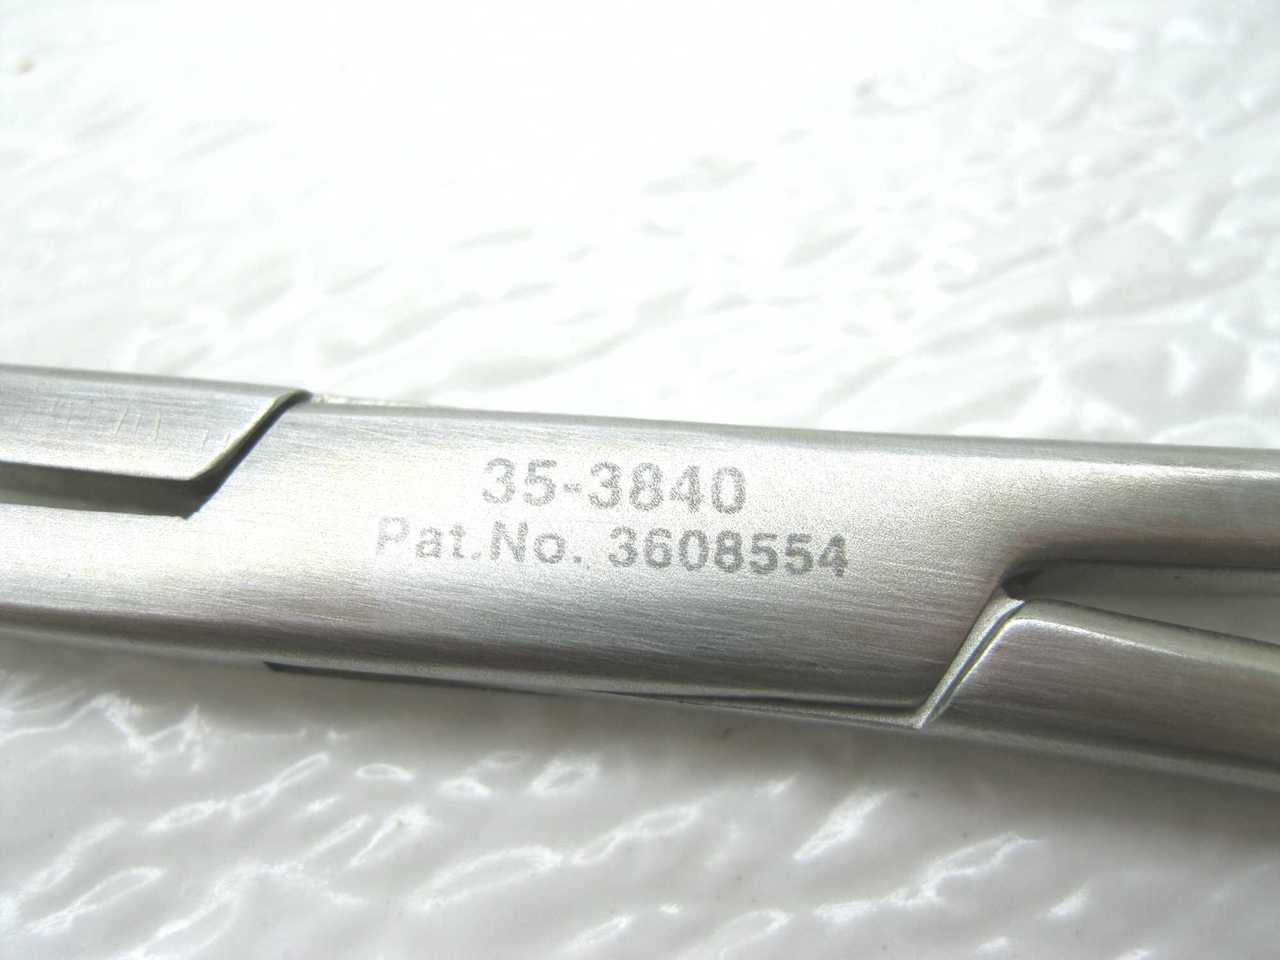    Pilling Glover Spoon Shaped Clamp - 35-3840